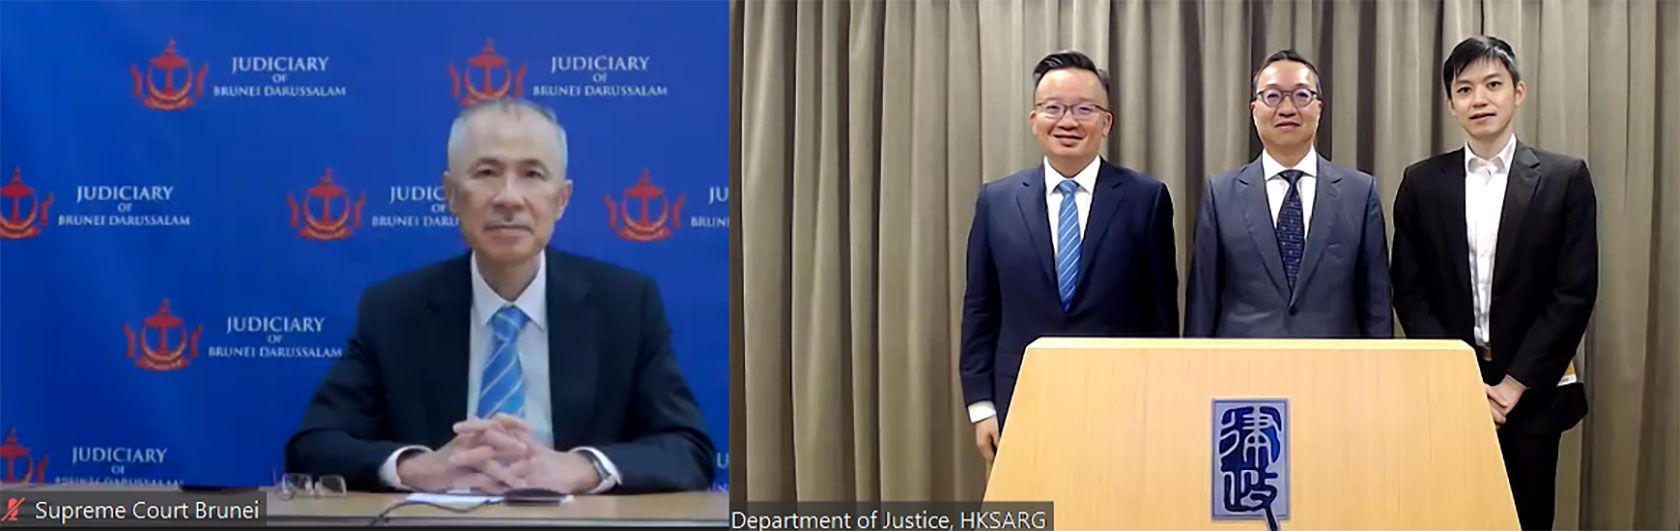 Online seminar co-organised by AALCO Hong Kong Regional Arbitration Centre and eBRAM International Online Dispute Resolution Centre held today